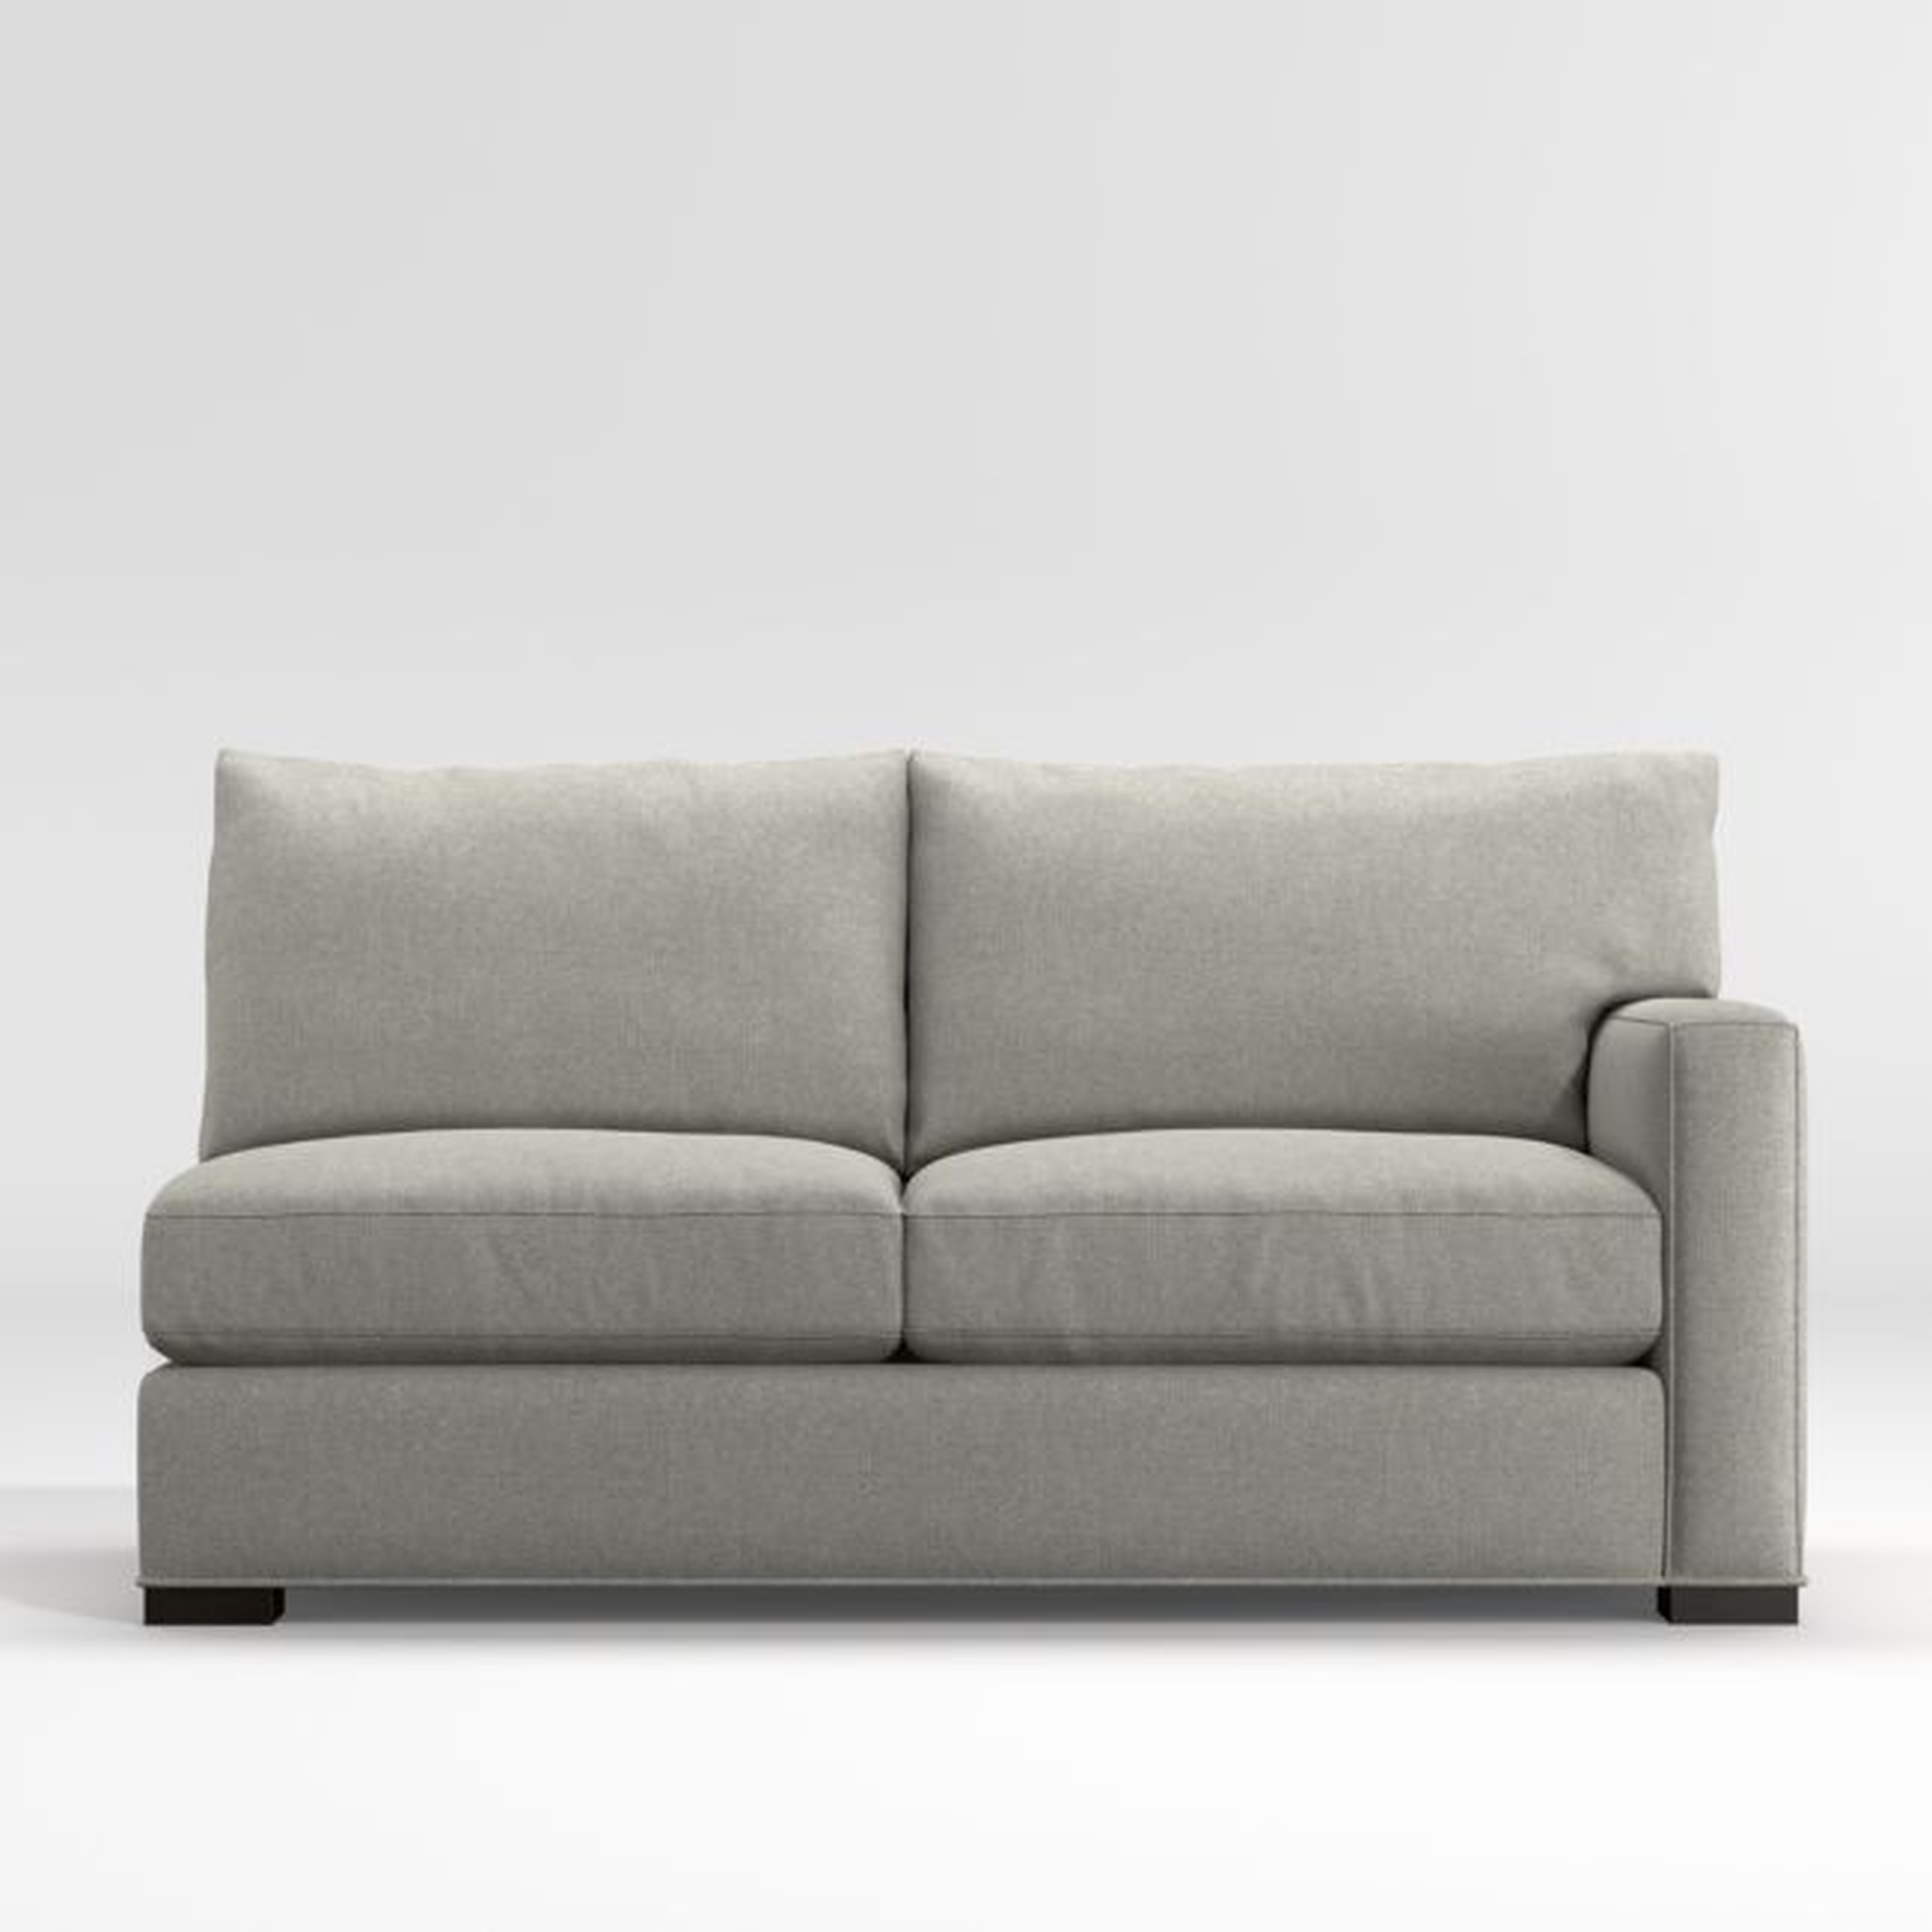 Axis Right Arm Apartment Sofa - Crate and Barrel